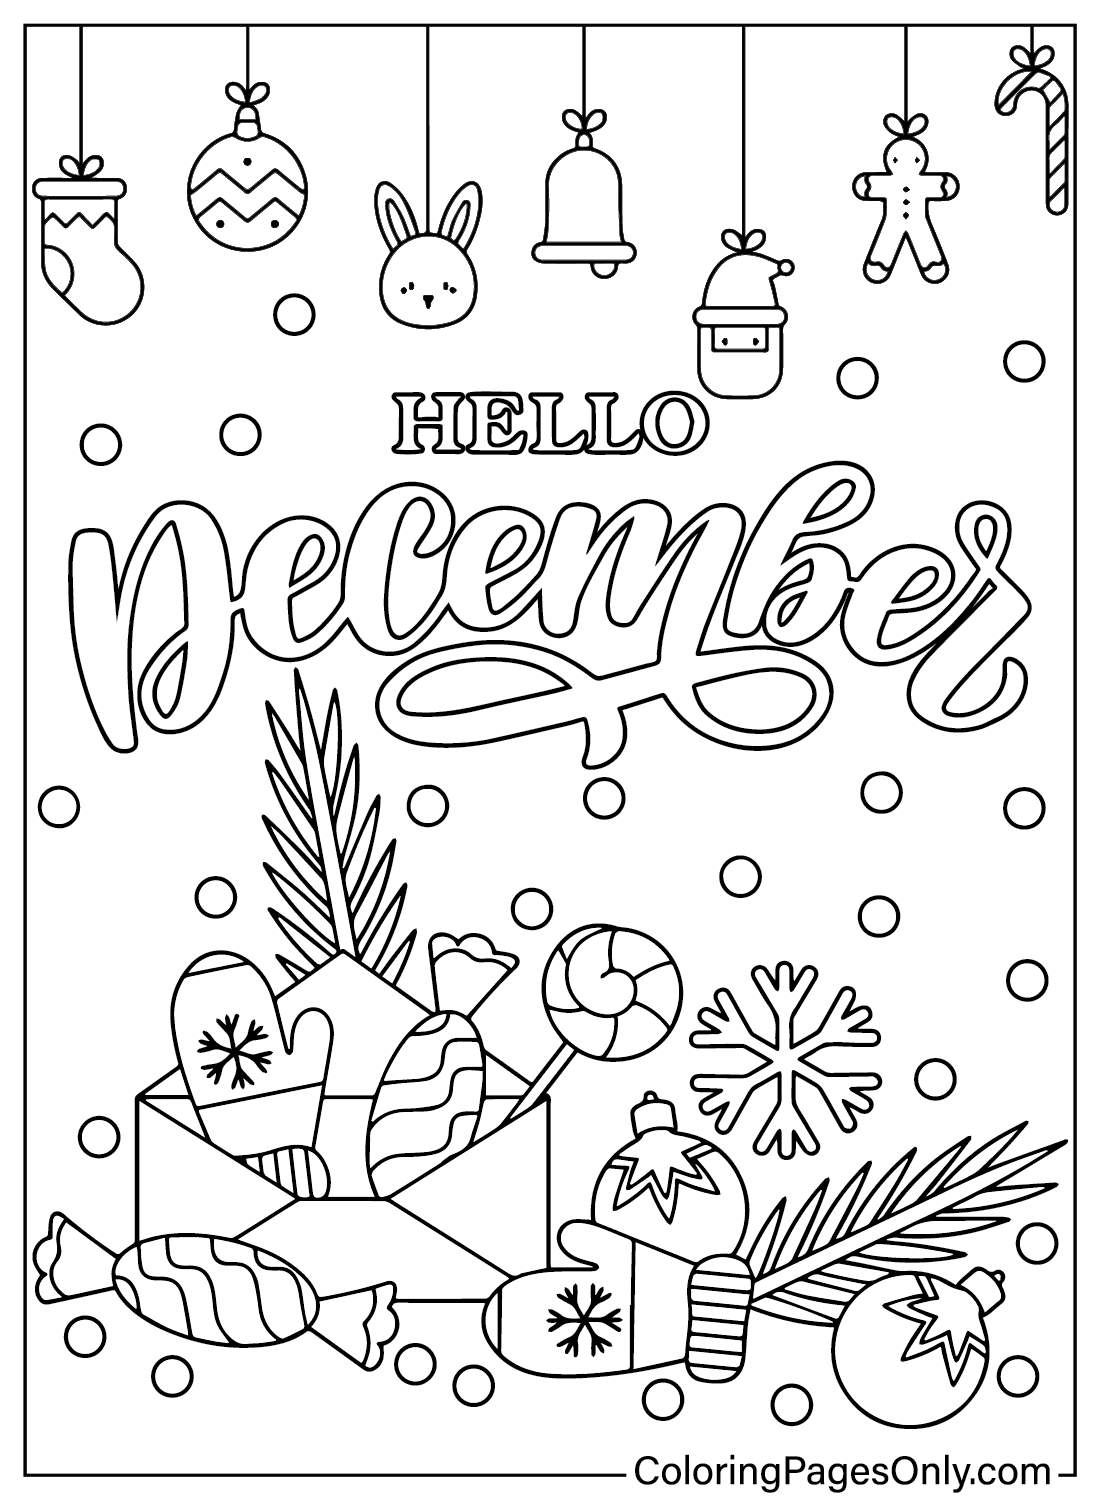 Printable December Coloring Page from December